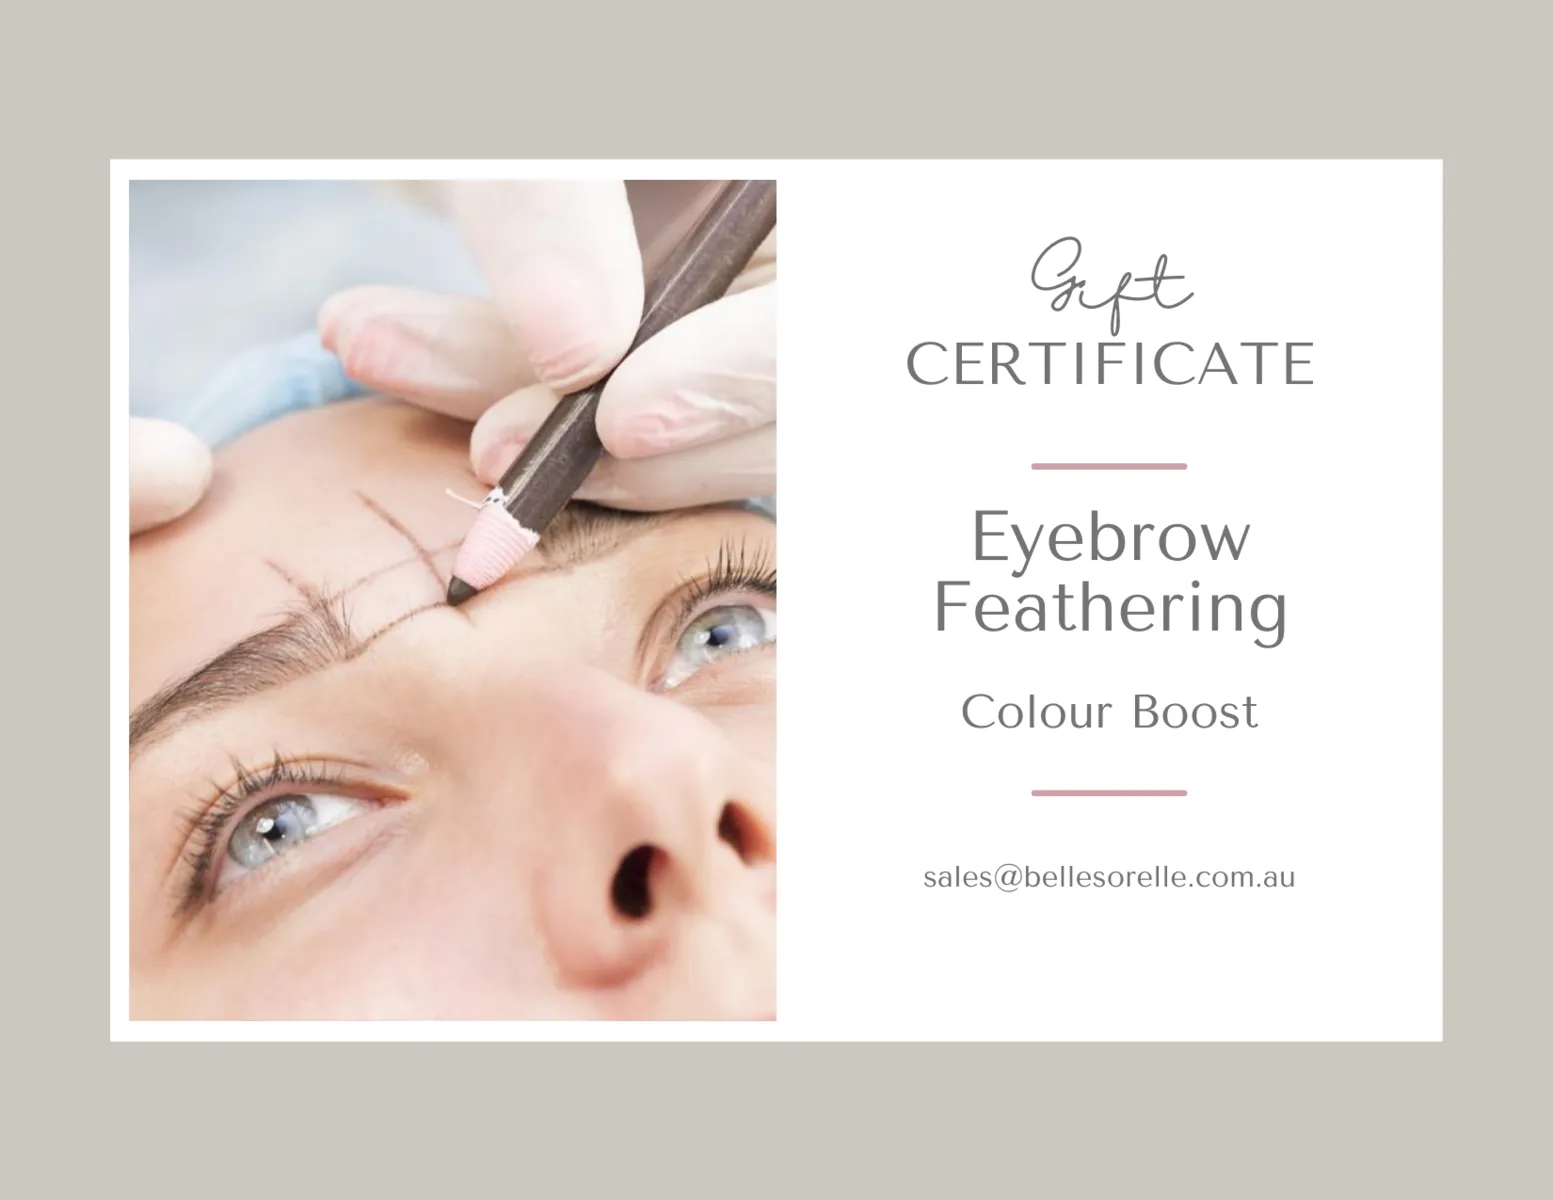 Eyebrow Feathering - 12 month Colour Boost